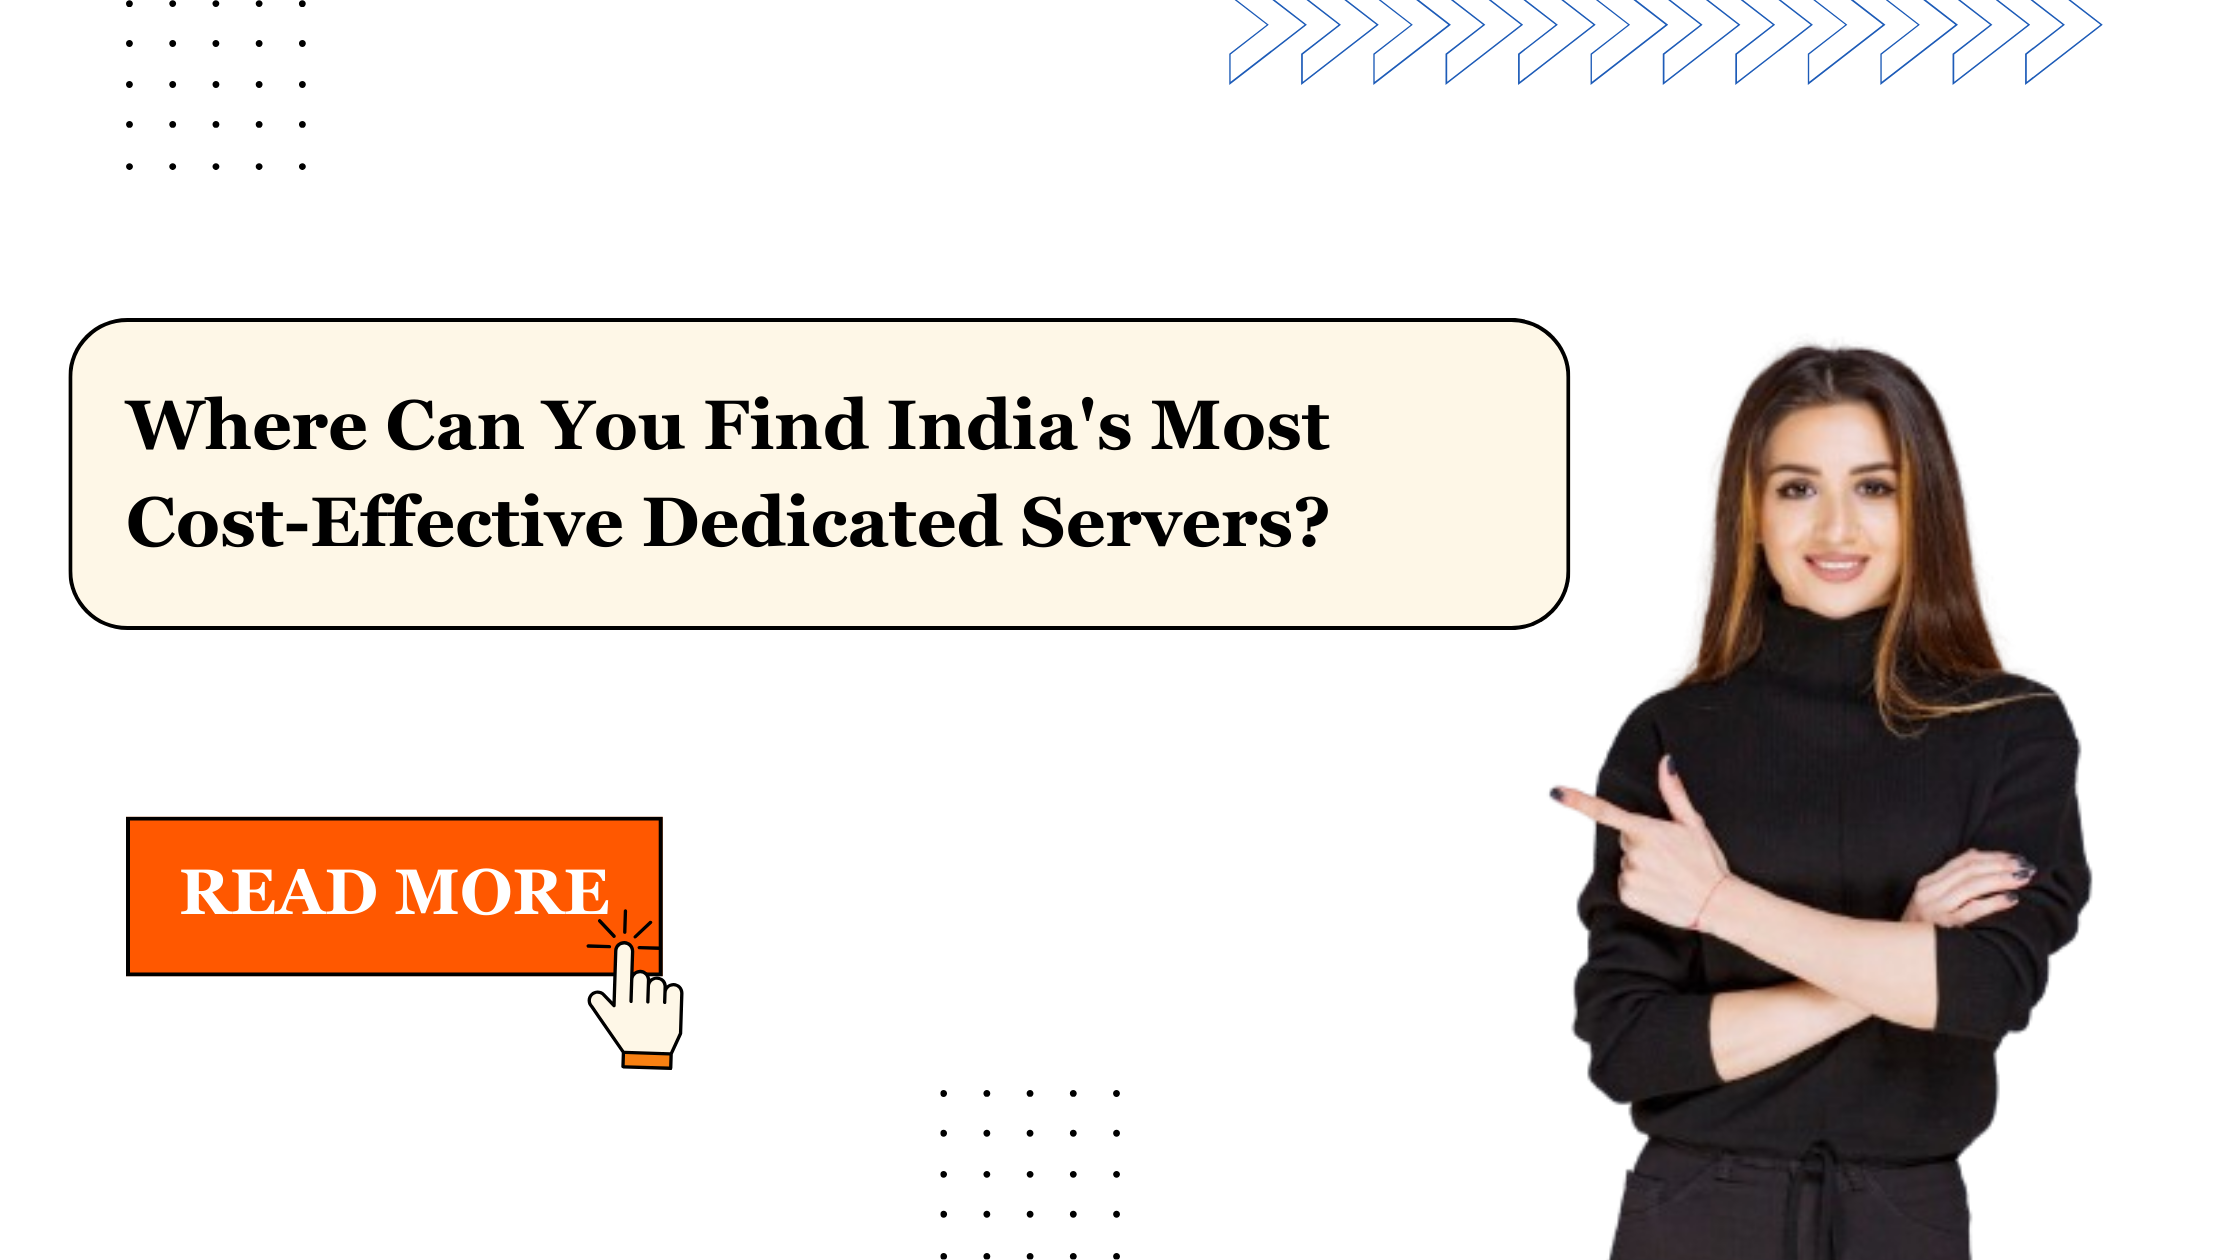 Where Can You Find India's Most Cost-Effective Dedicated Servers